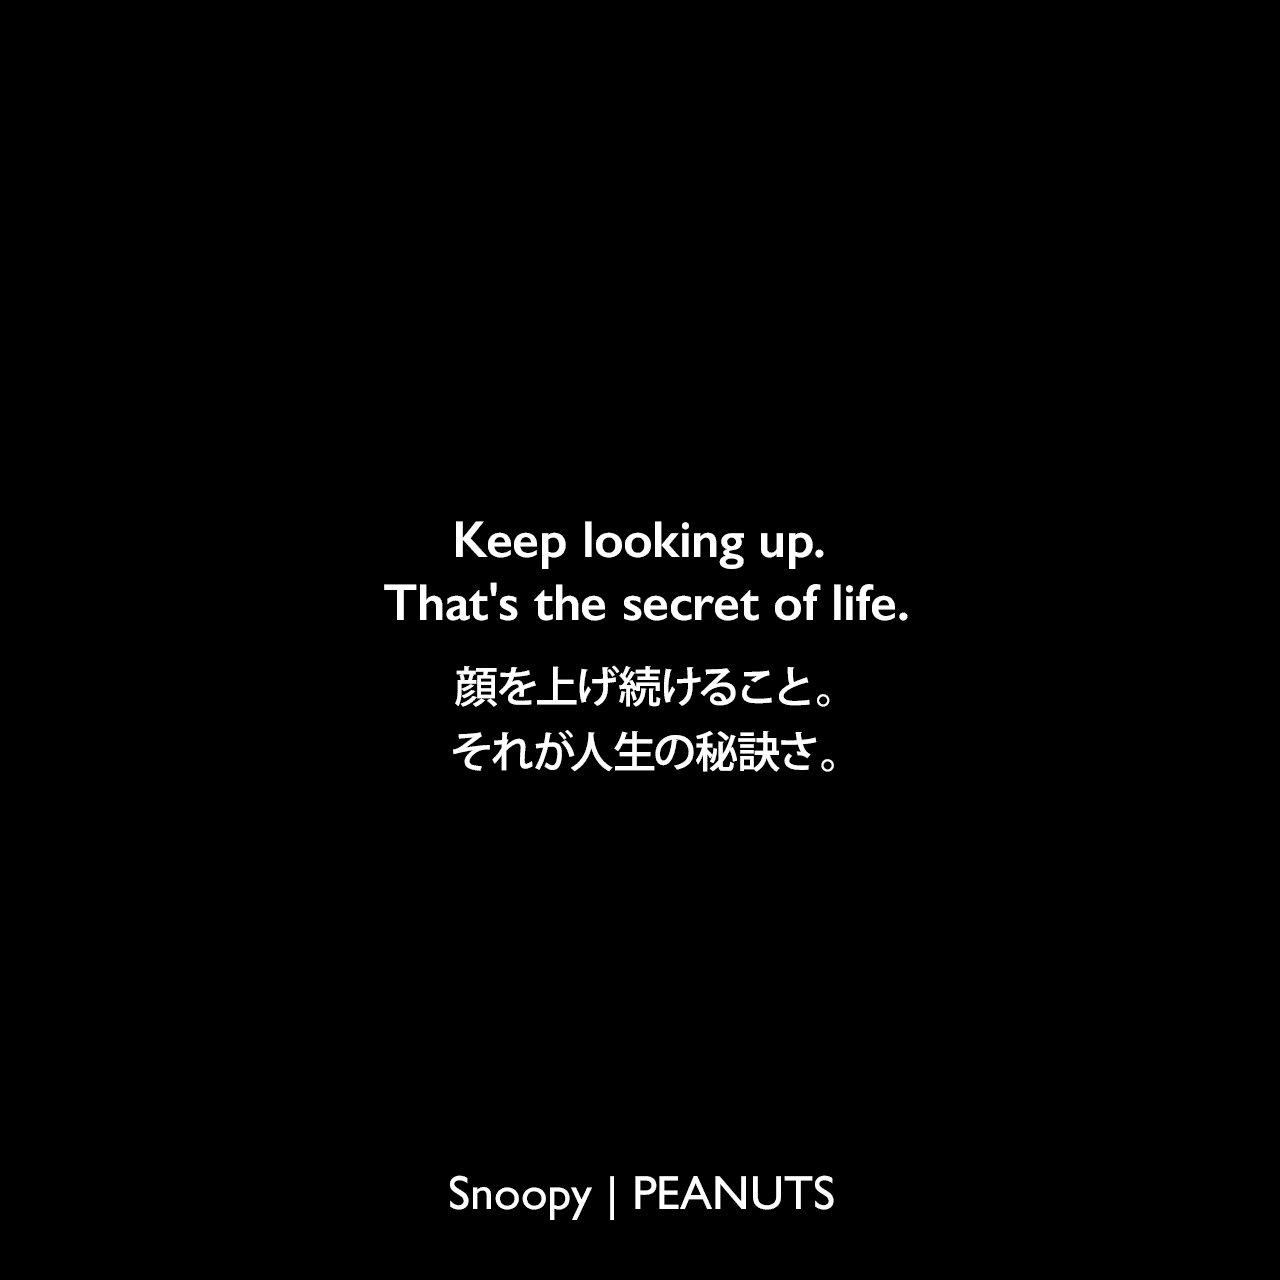 Keep looking up. That's the secret of life.顔を上げ続けること。それが人生の秘訣さ。Charles Monroe Schulz